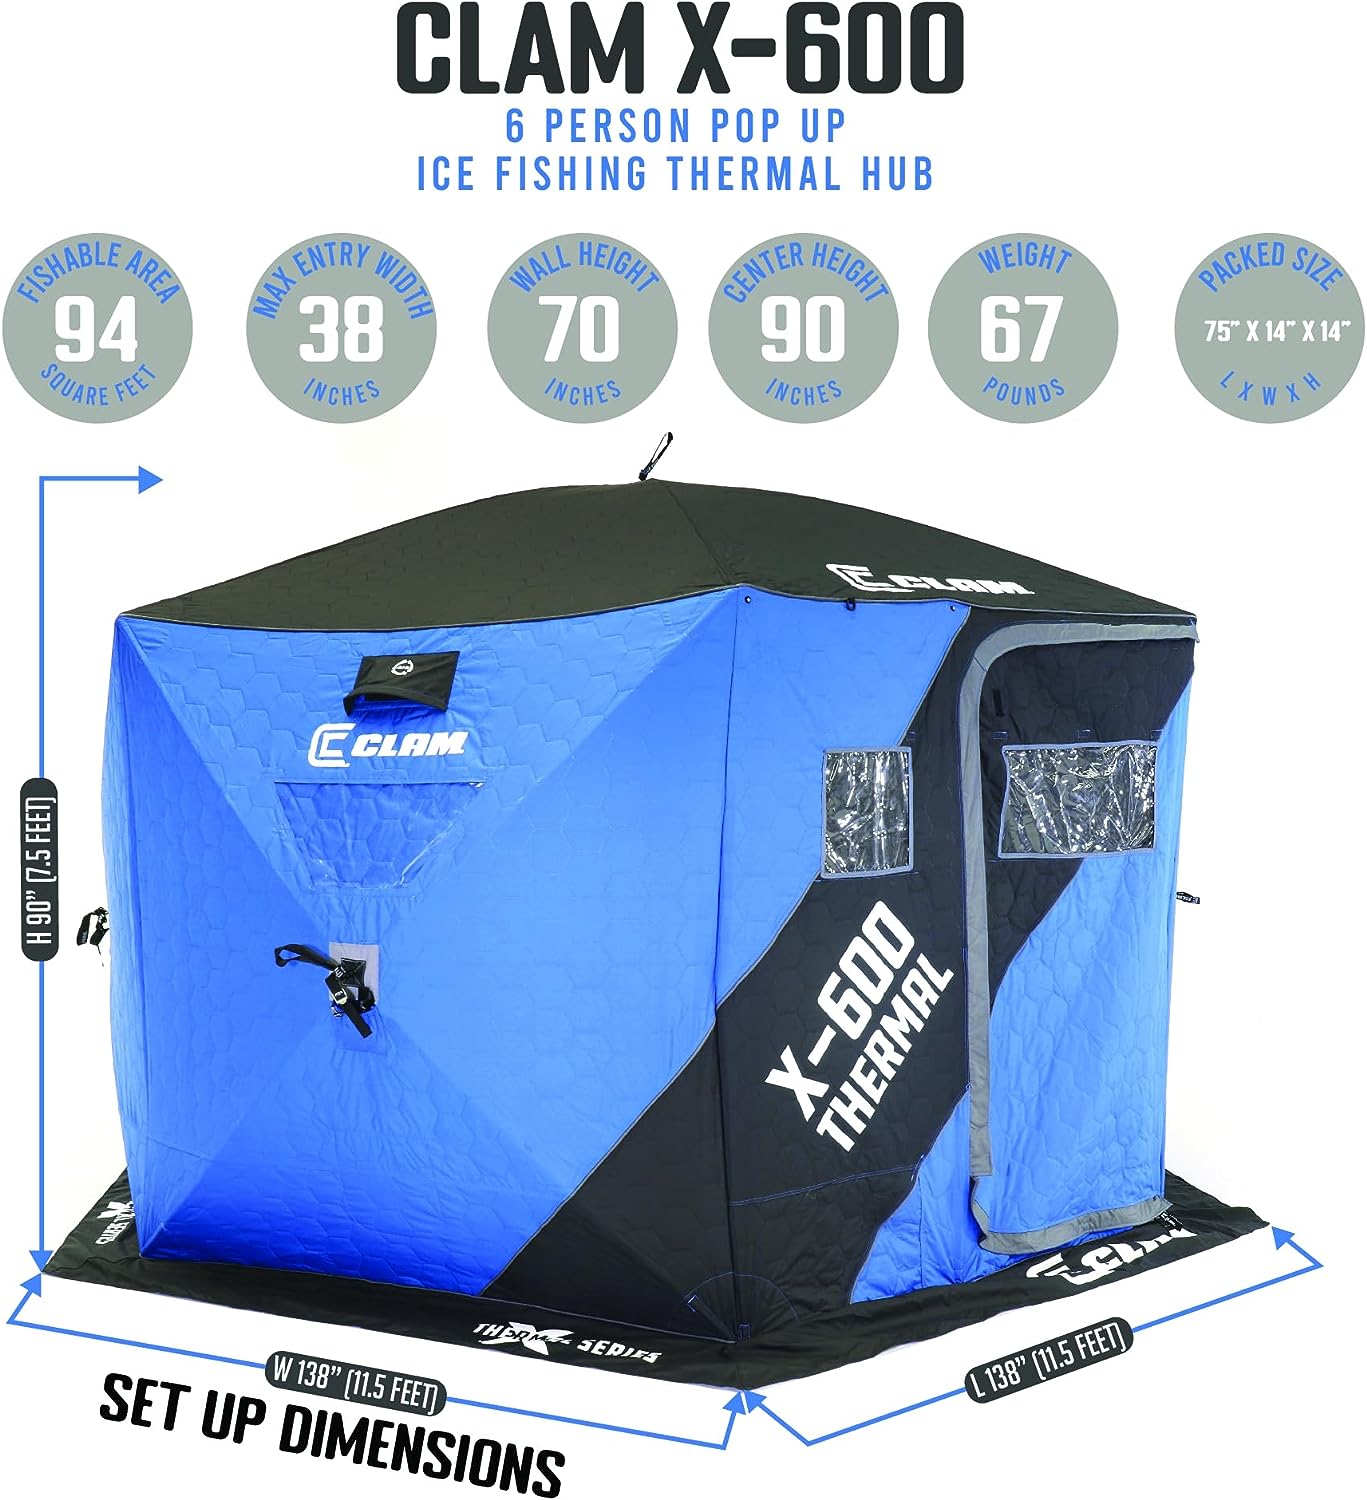 CLAM C-890 Portable 11.5 Ft 6 Person Pop Up Ice Fishing Thermal Hub Shelter  Tent, 1 Piece - Baker's